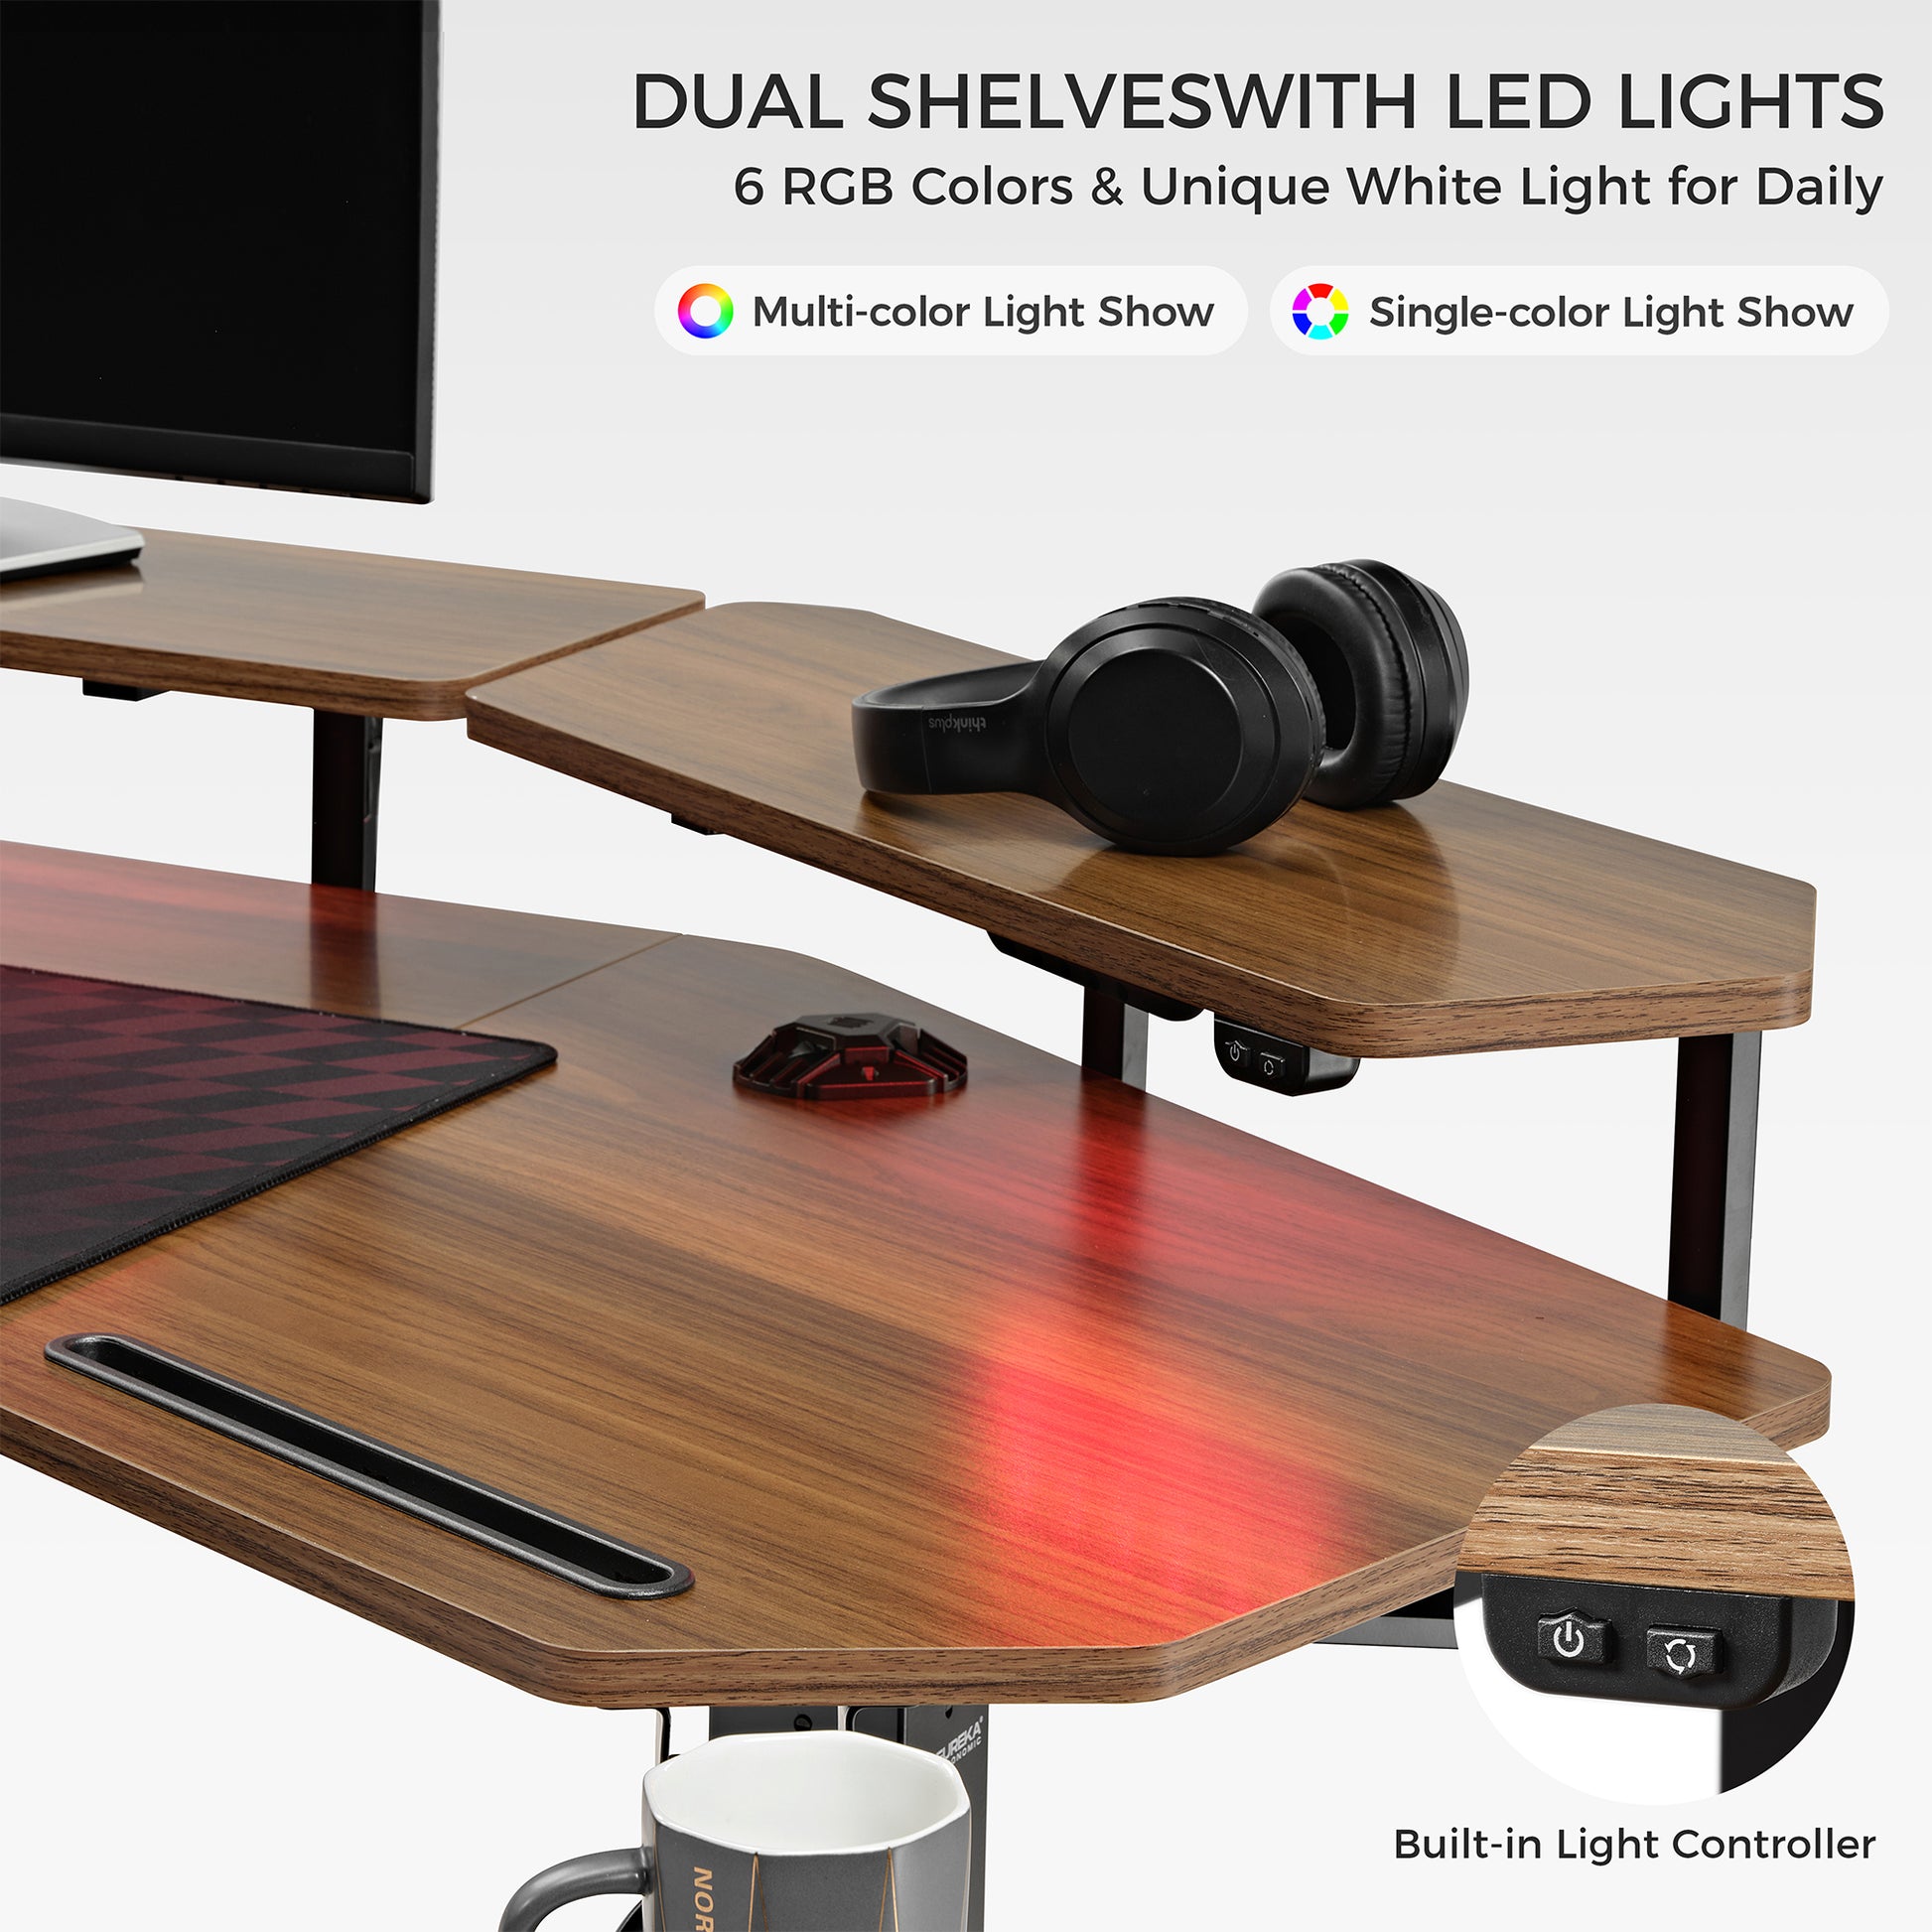 Monitor Shelves with Bulit-in Light control